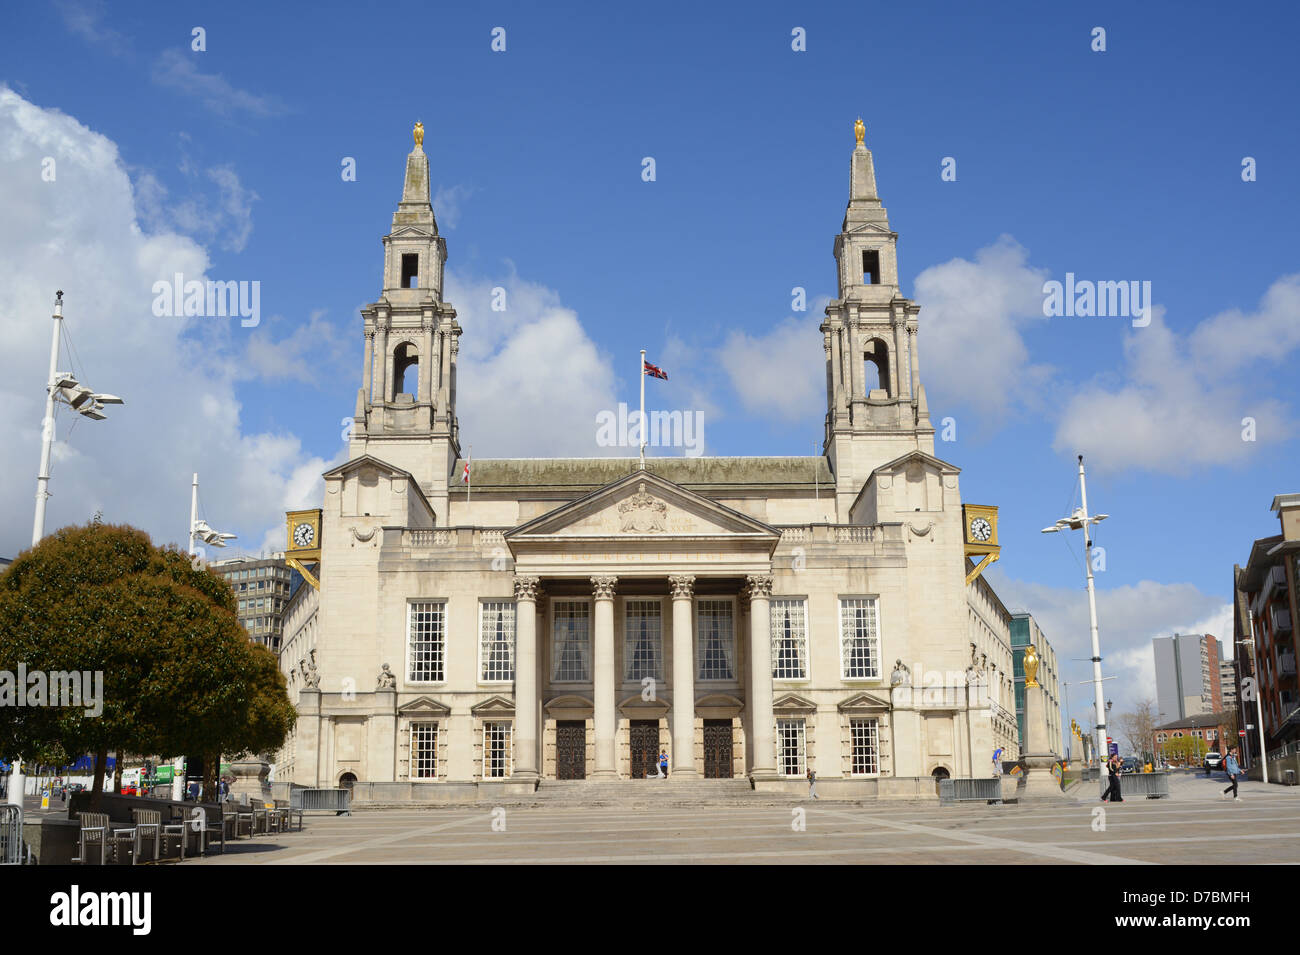 Leeds civic hall designed by vincent harris opened by King George V in 1933 Yorkshire UK Stock Photo